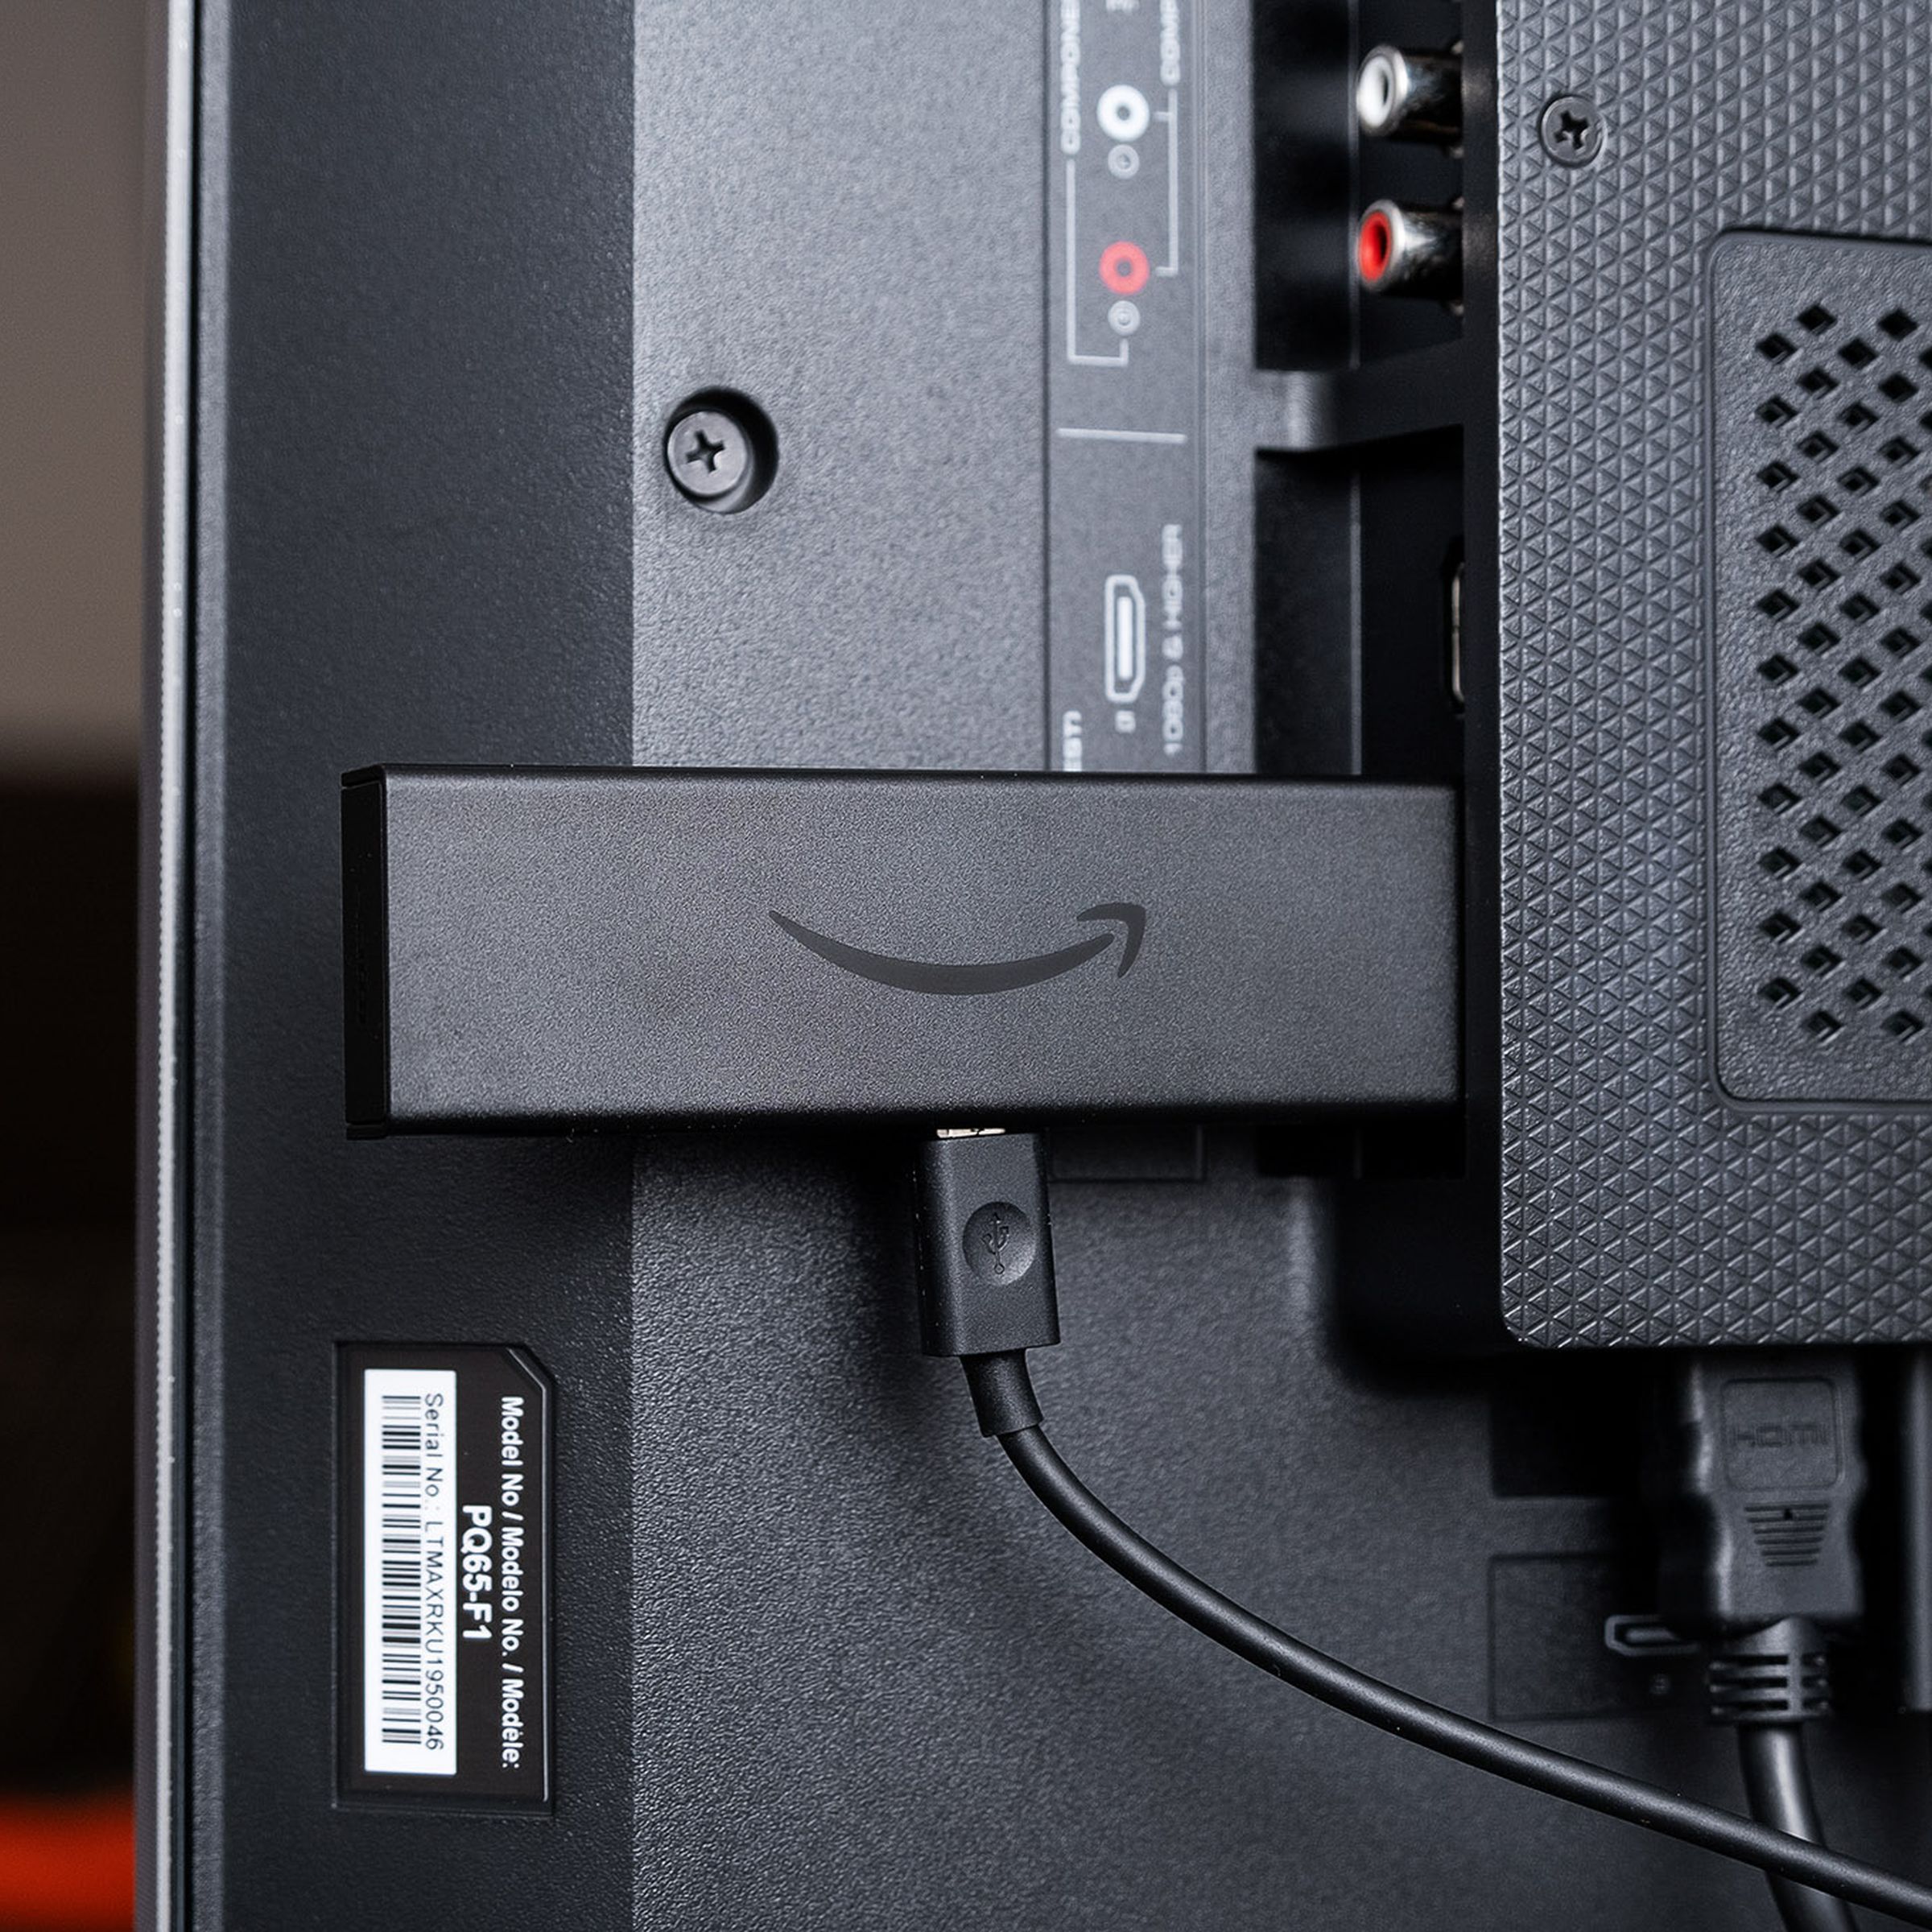 Amazon’s Fire TV Stick 4K, a great streaming stick for $50, pictured attached to a TV’s HDMI port.